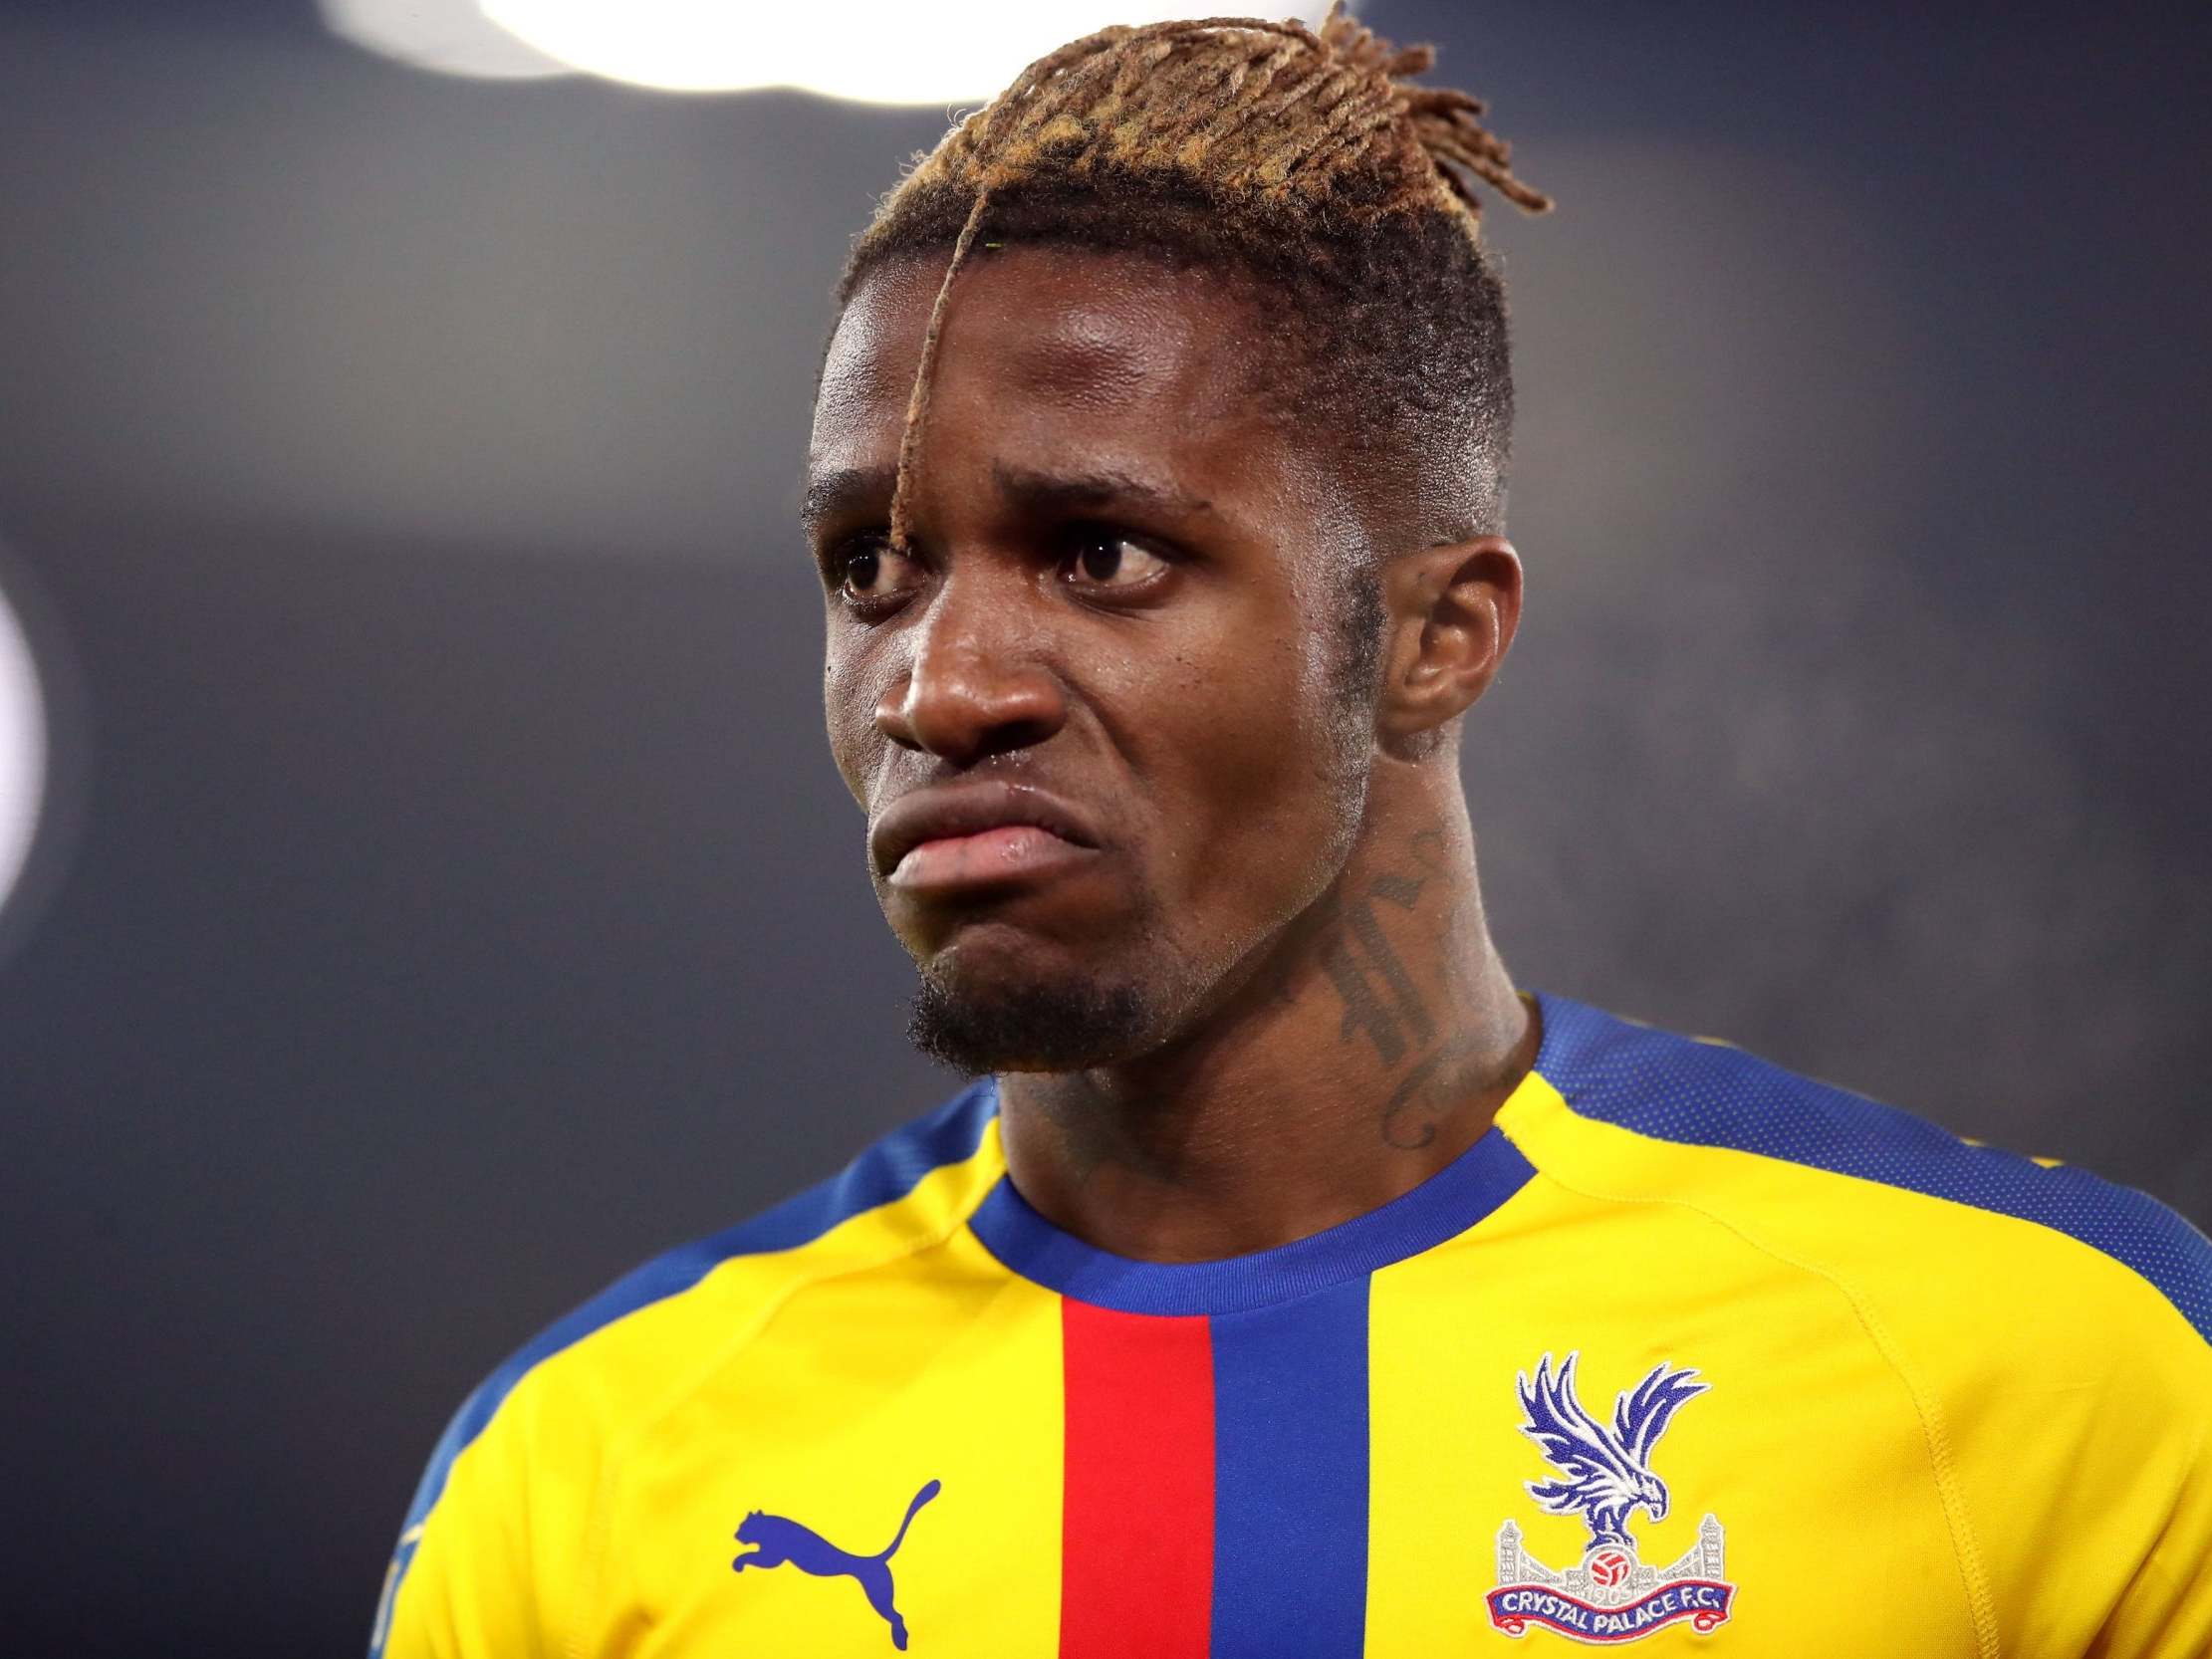 Wilfried Zaha is facing a Crystal Palace fan backlash after trying to leave the club